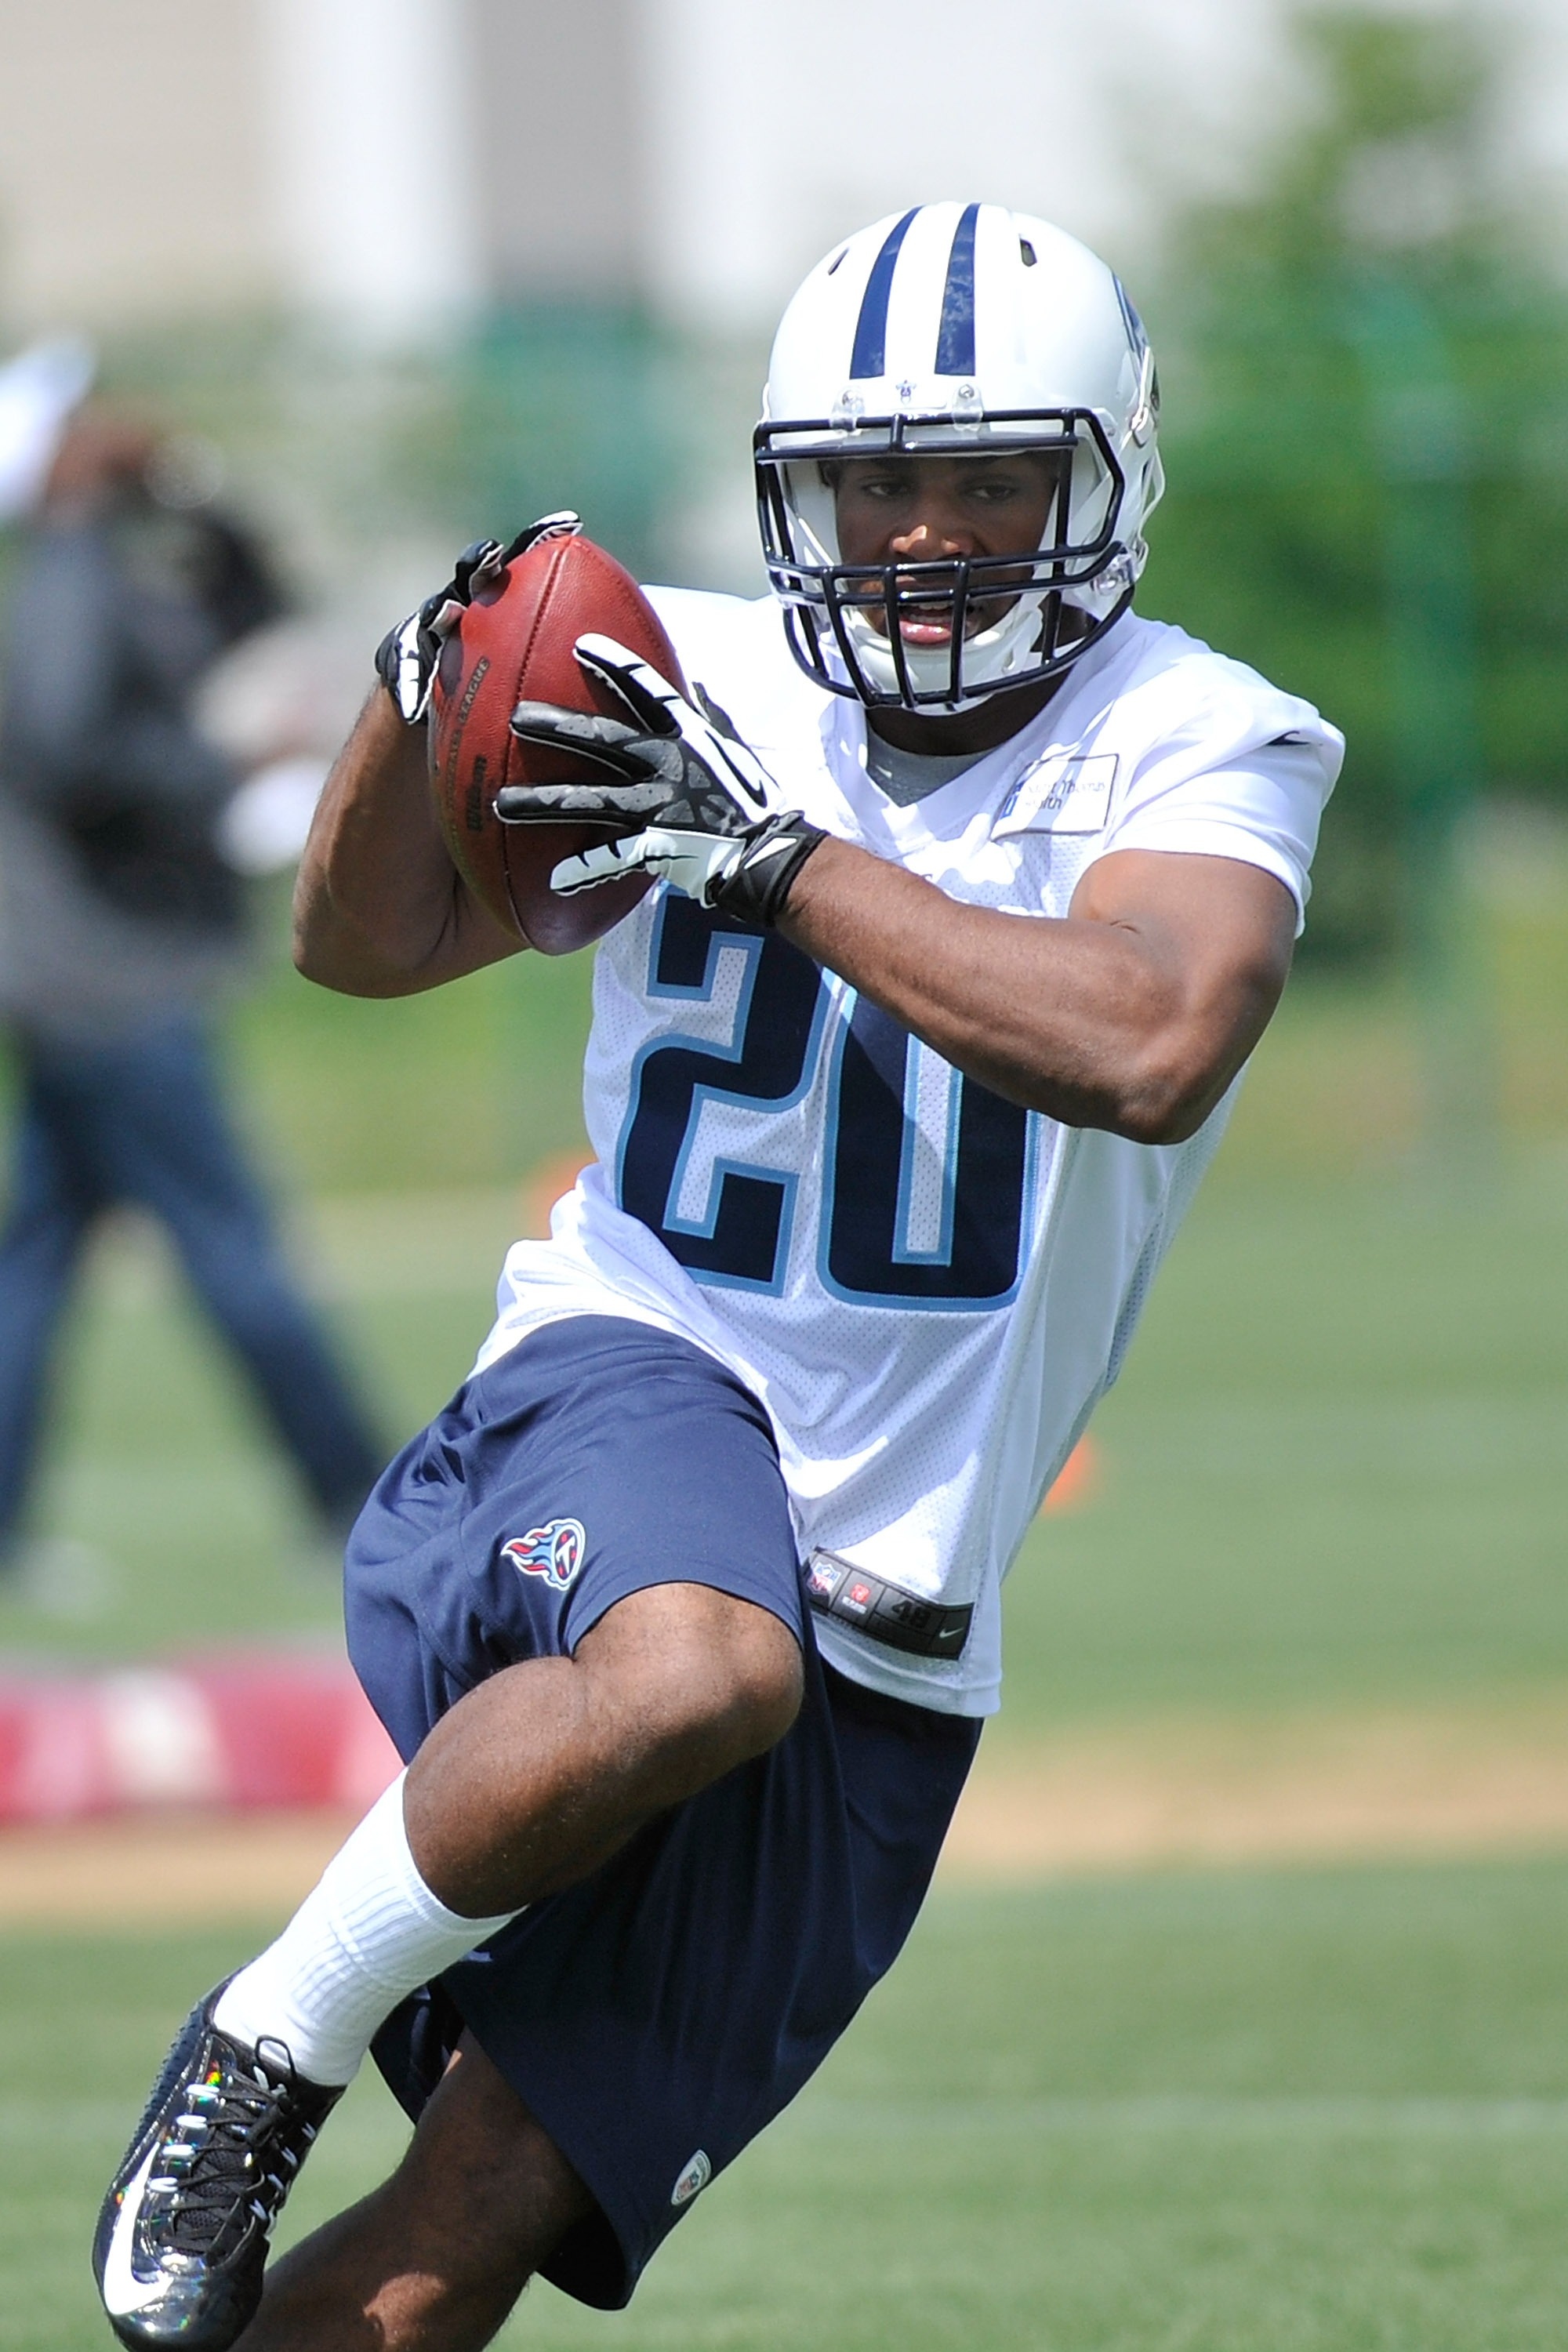 Bishop Sankey, minicamping in Tennessee, preparing for a serious role (Frederick Breedon/Getty Images)